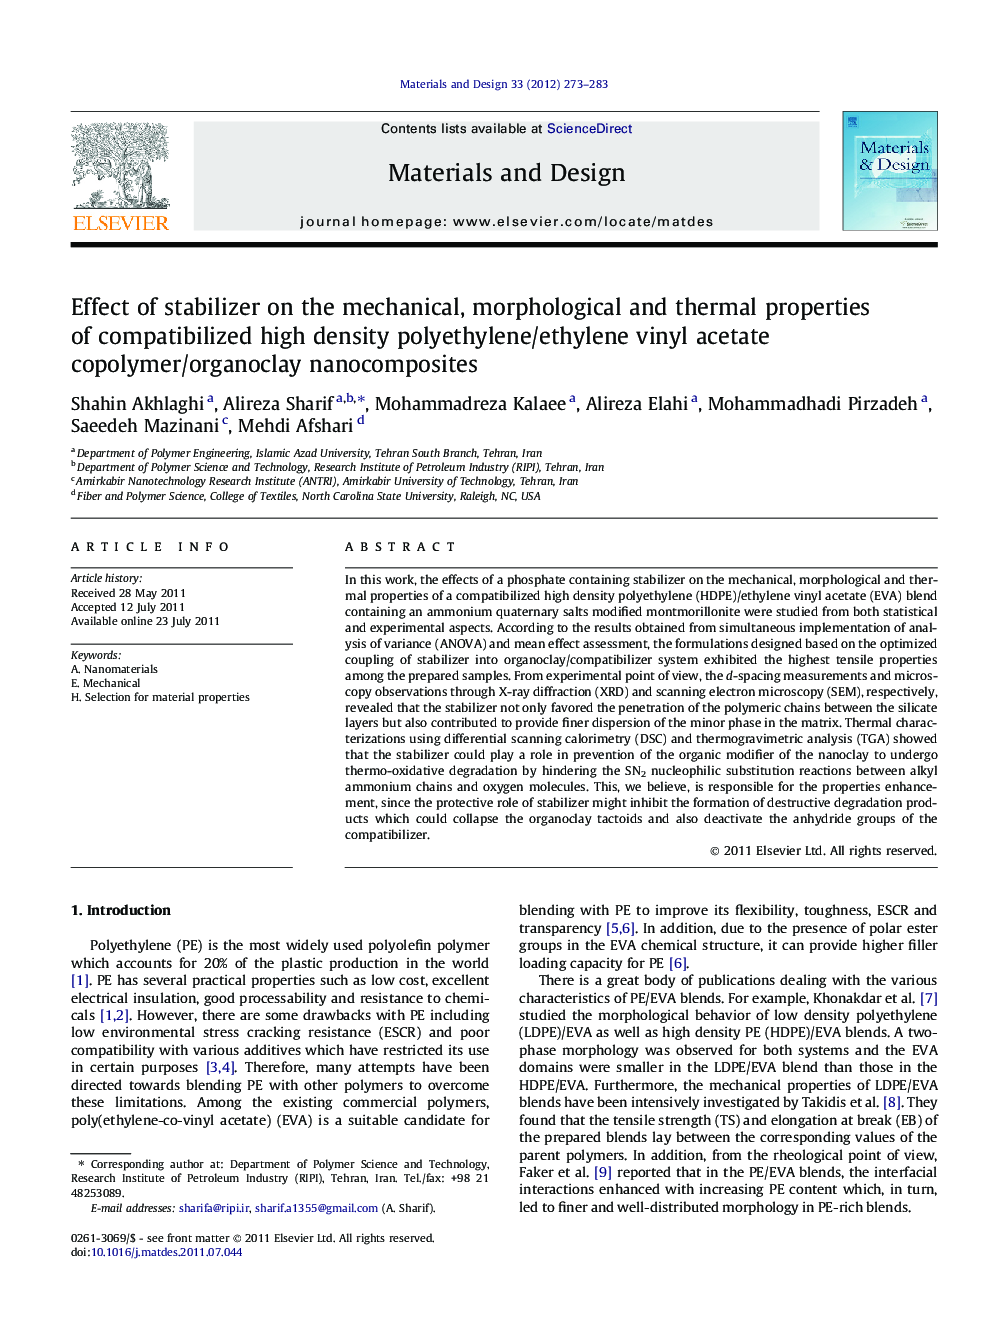 Effect of stabilizer on the mechanical, morphological and thermal properties of compatibilized high density polyethylene/ethylene vinyl acetate copolymer/organoclay nanocomposites